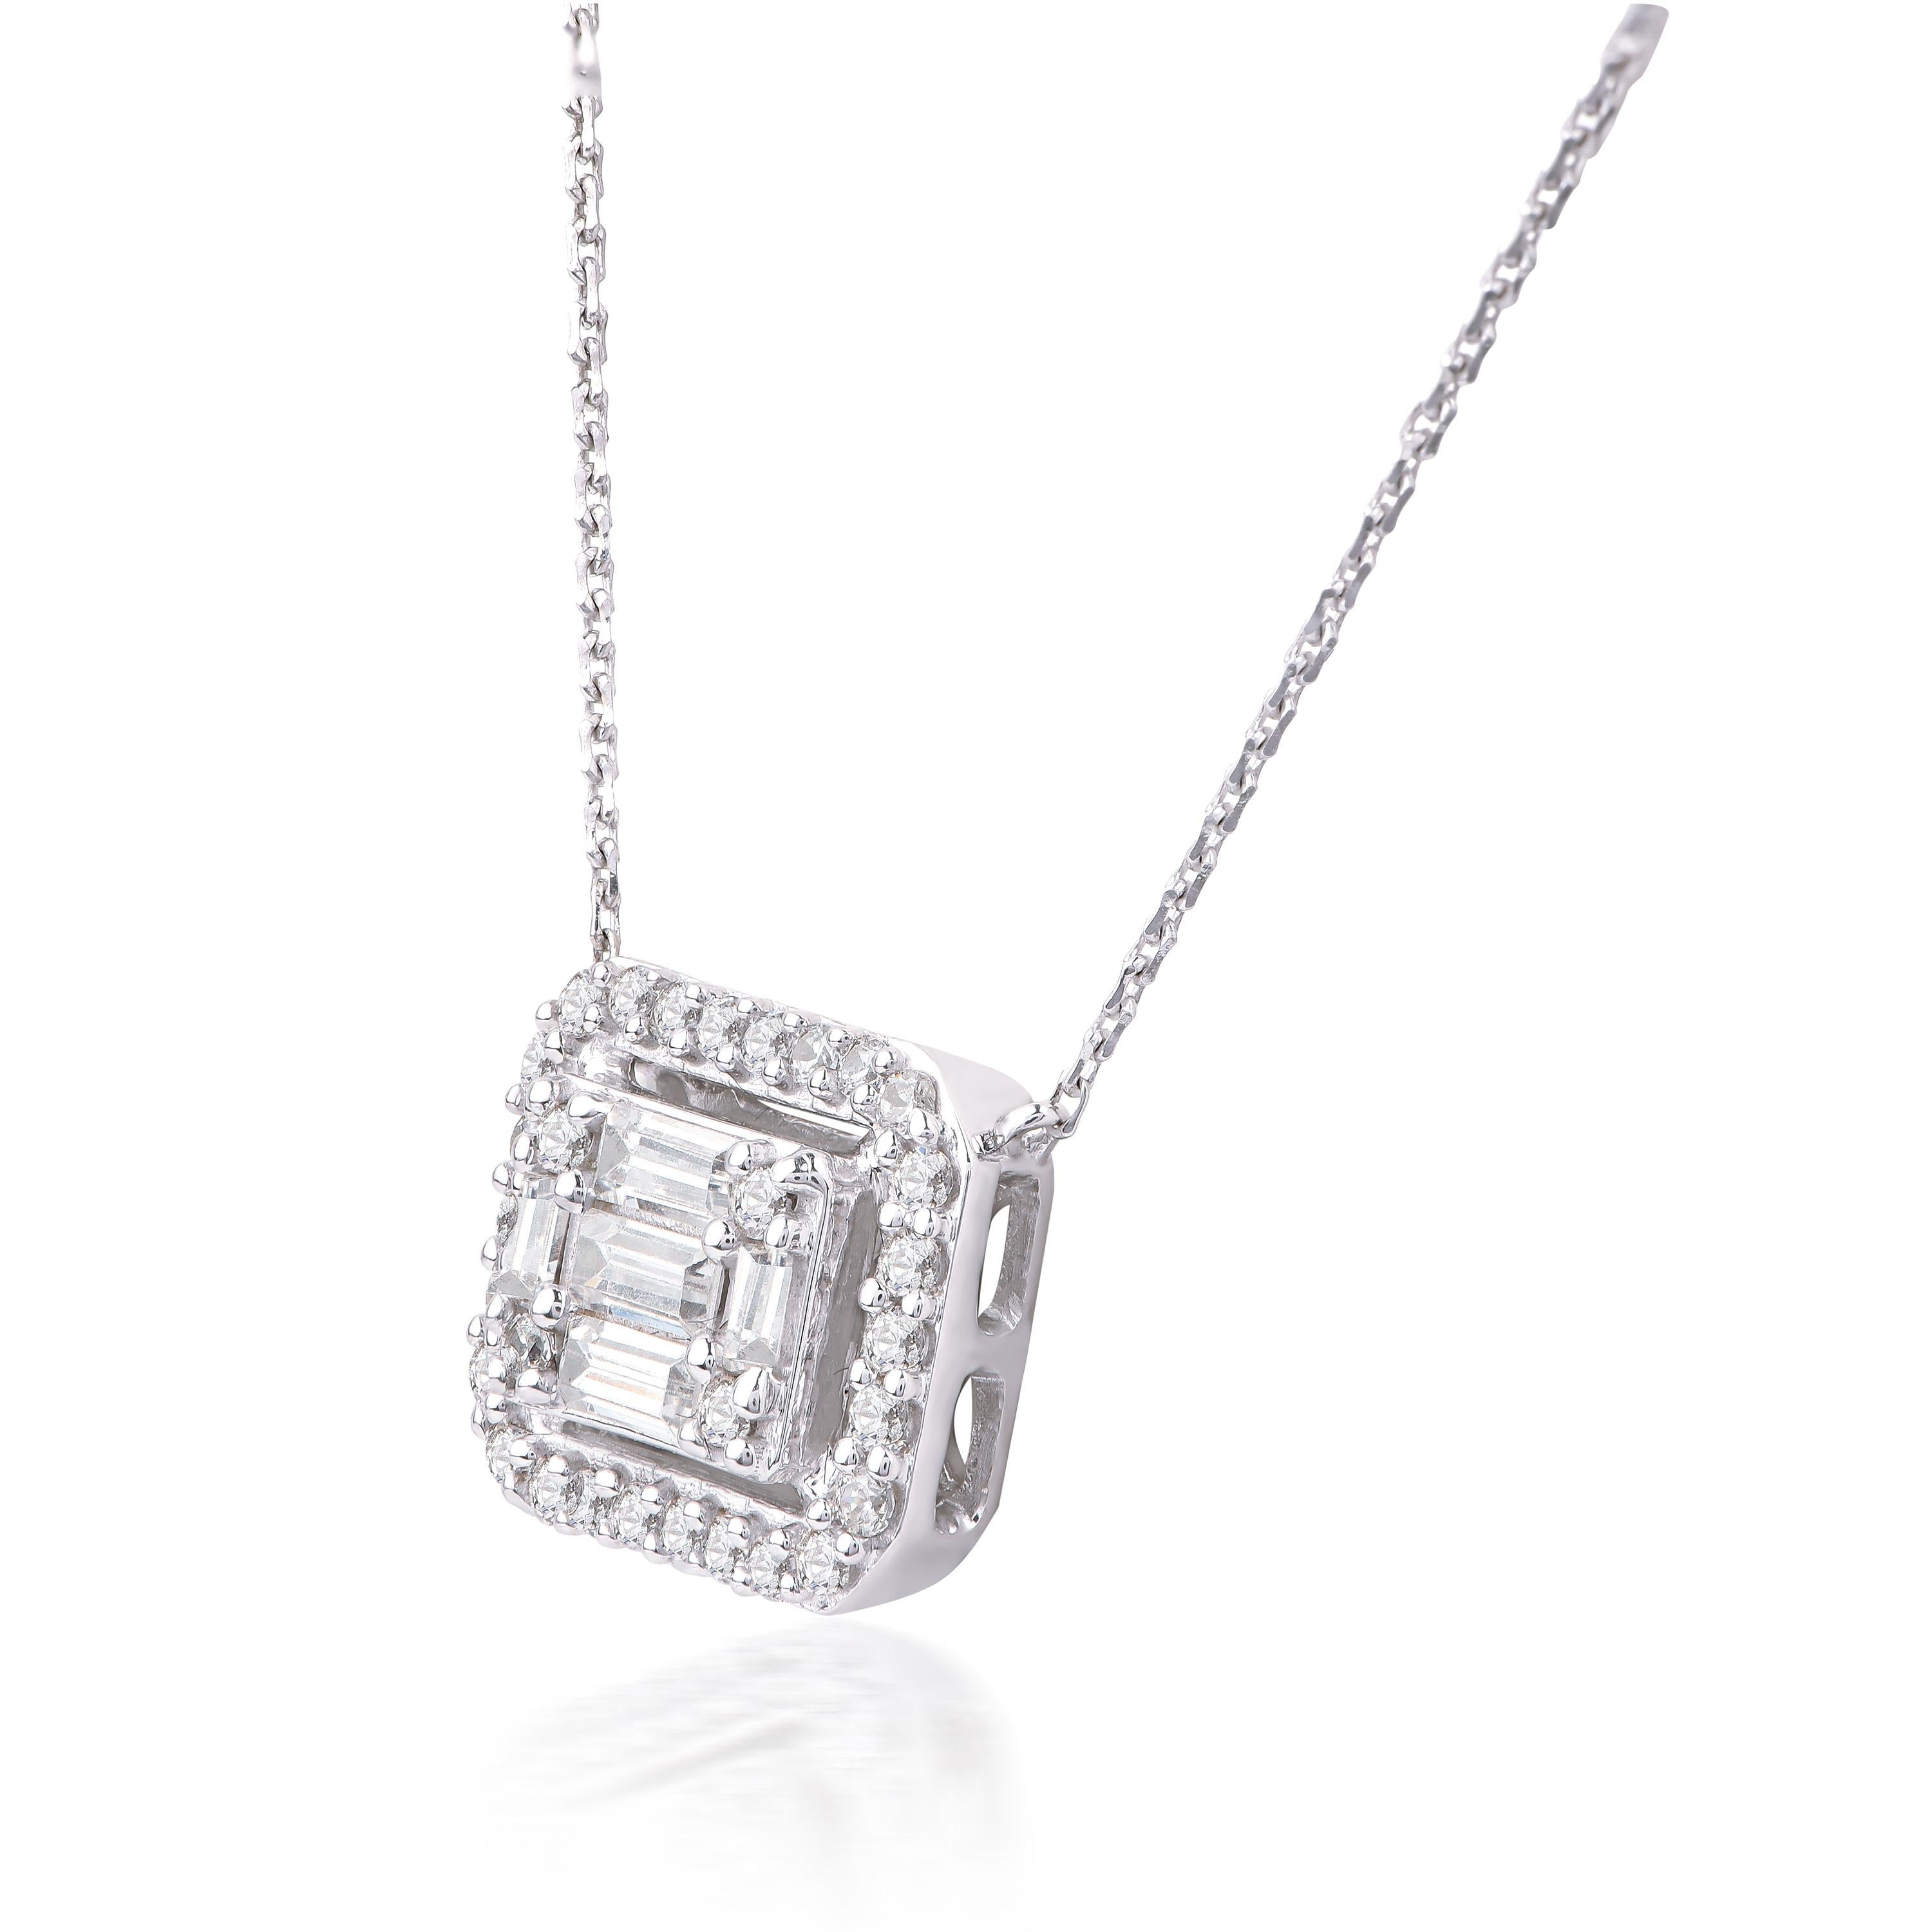 Shines brightly with 30 brilliant cut and 5 baguette diamonds embedded elegantly in prong setting and handcrafted by our in-house experts in 18-karat white gold. The diamonds are graded H-I Color, I2 Clarity. 

We can customize this in yellow or